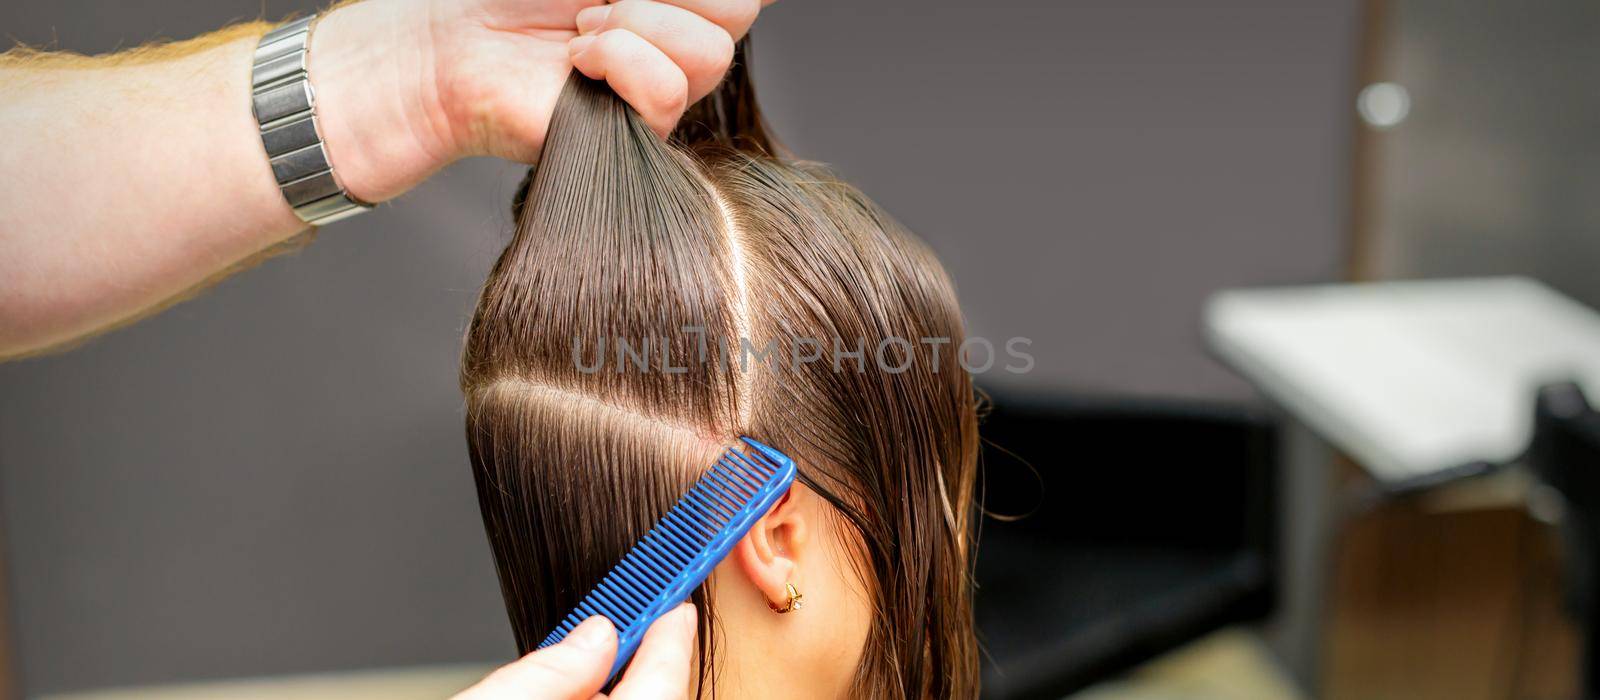 Male coiffeur divides women hair into sections with comb and hands in a beauty salon